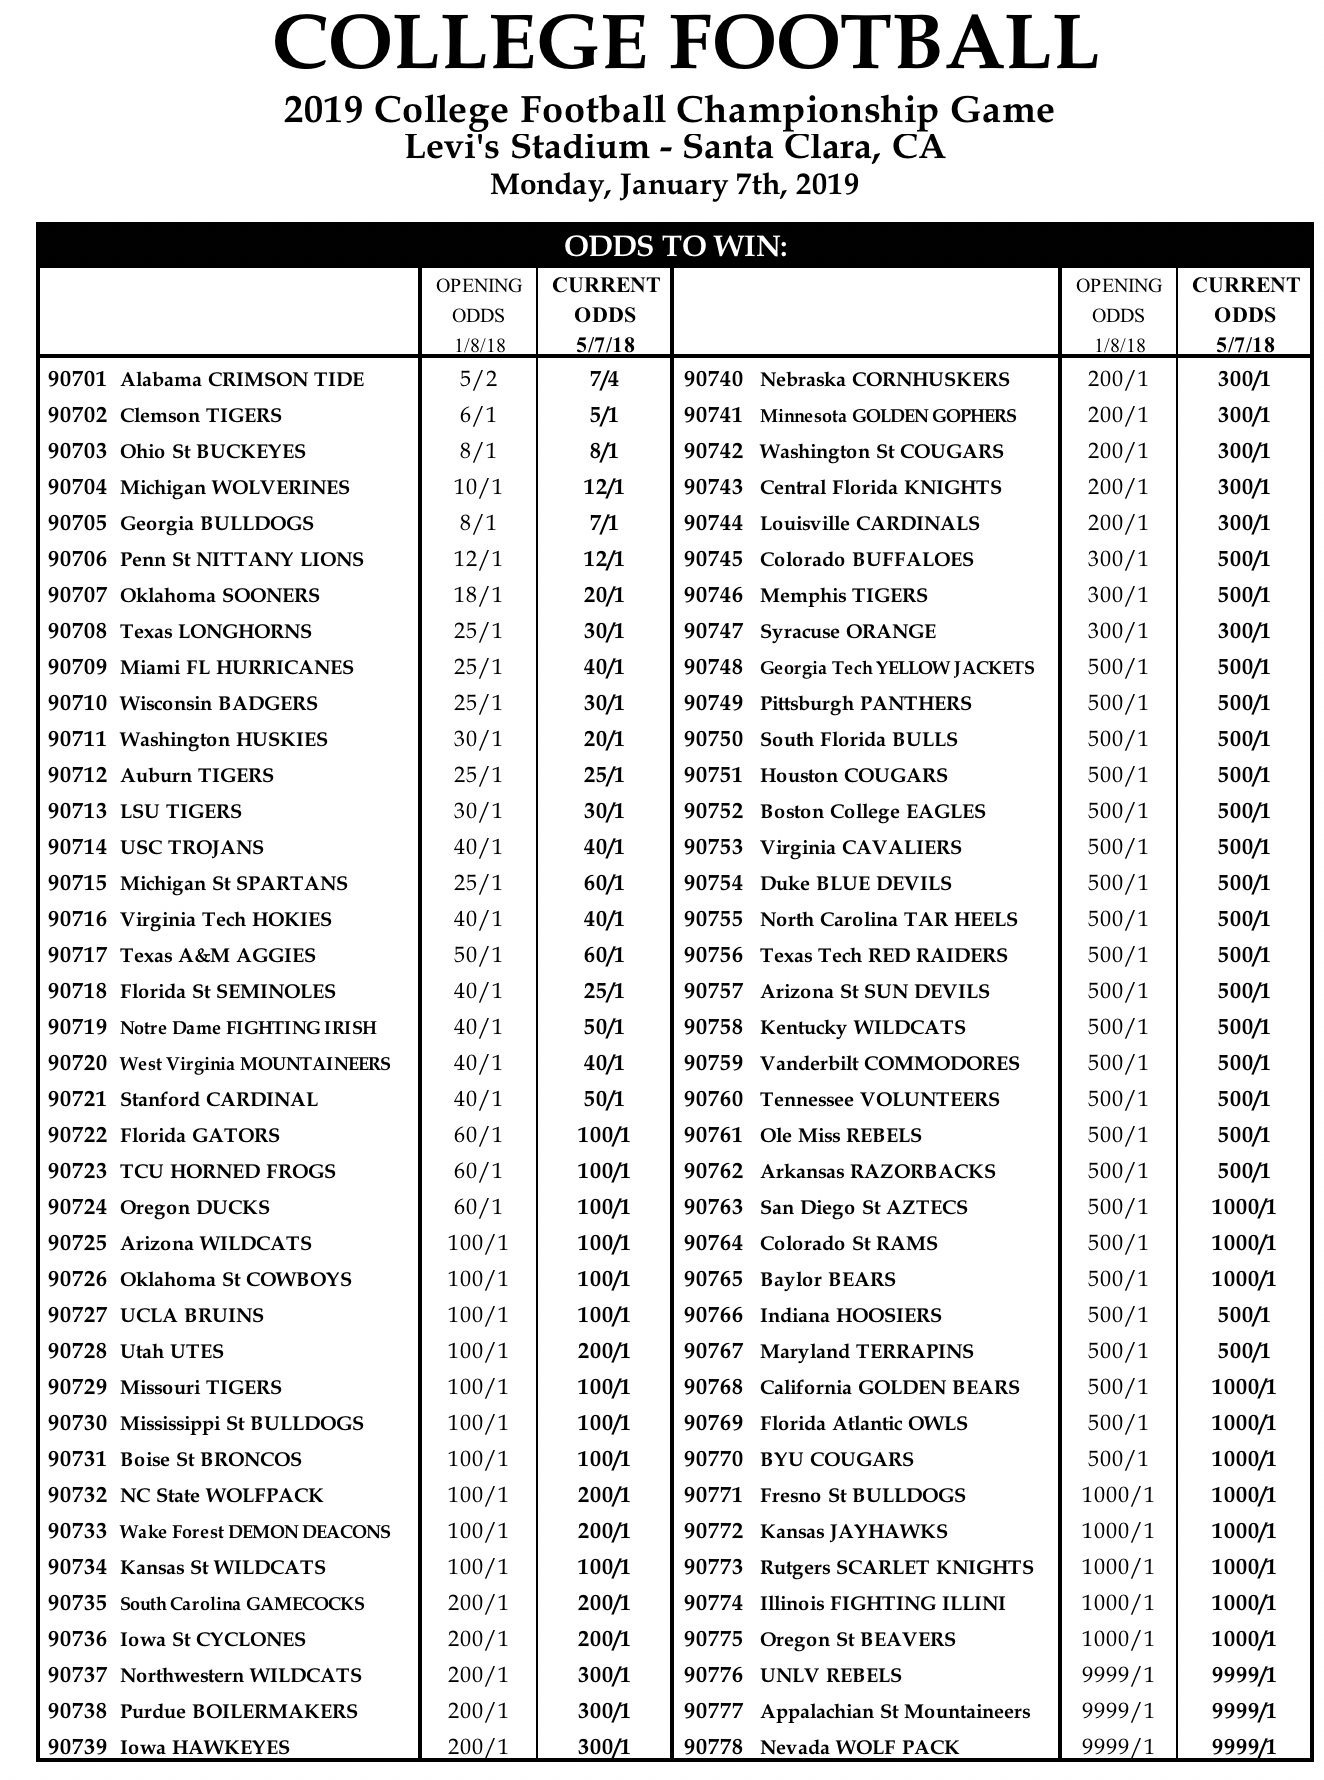 Odds to Win the 2018 College Football National Championship.